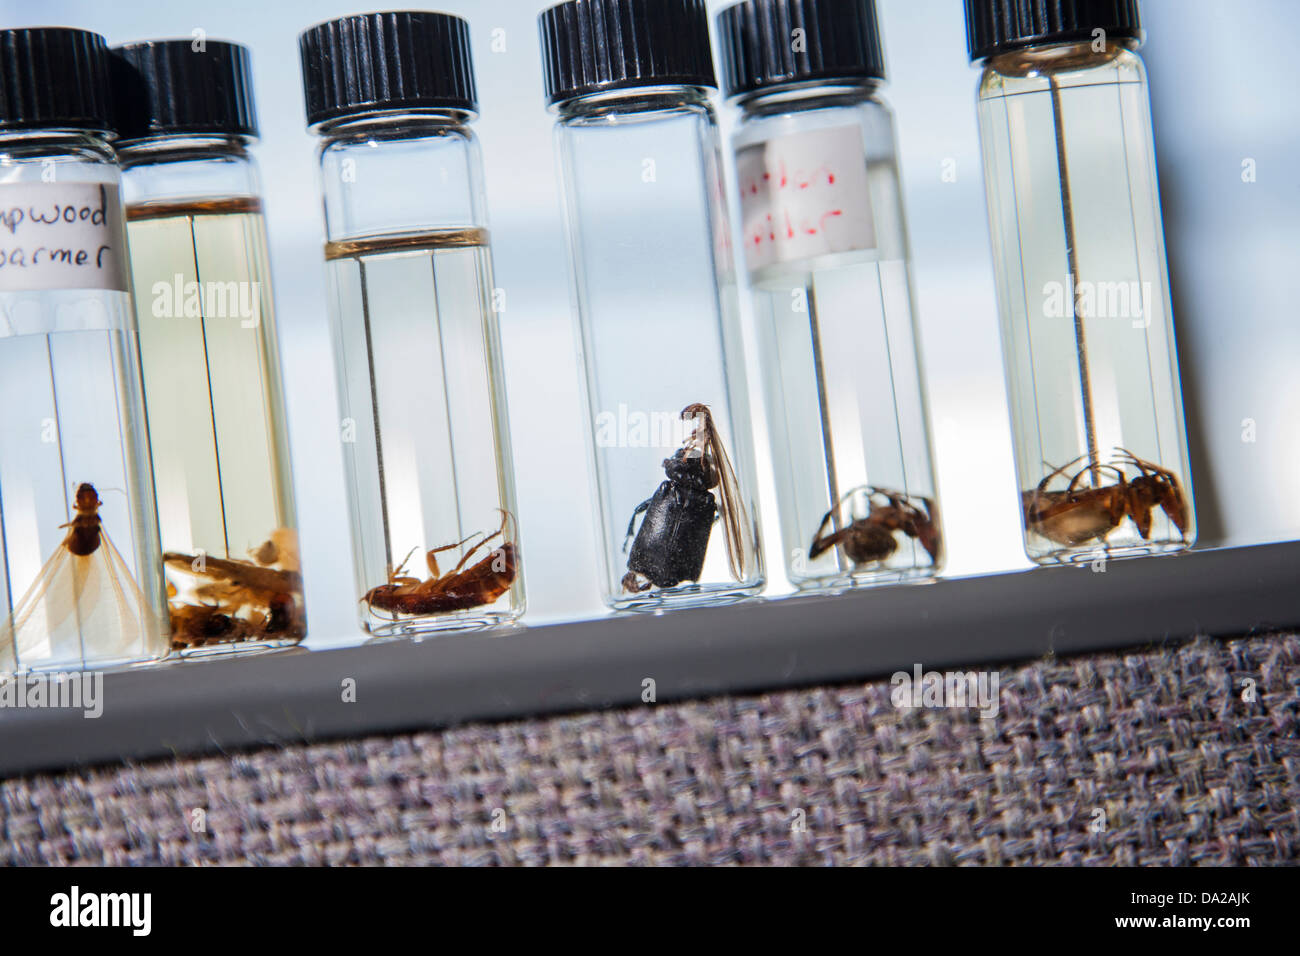 small bugs in glass tubes on a shelf Stock Photo